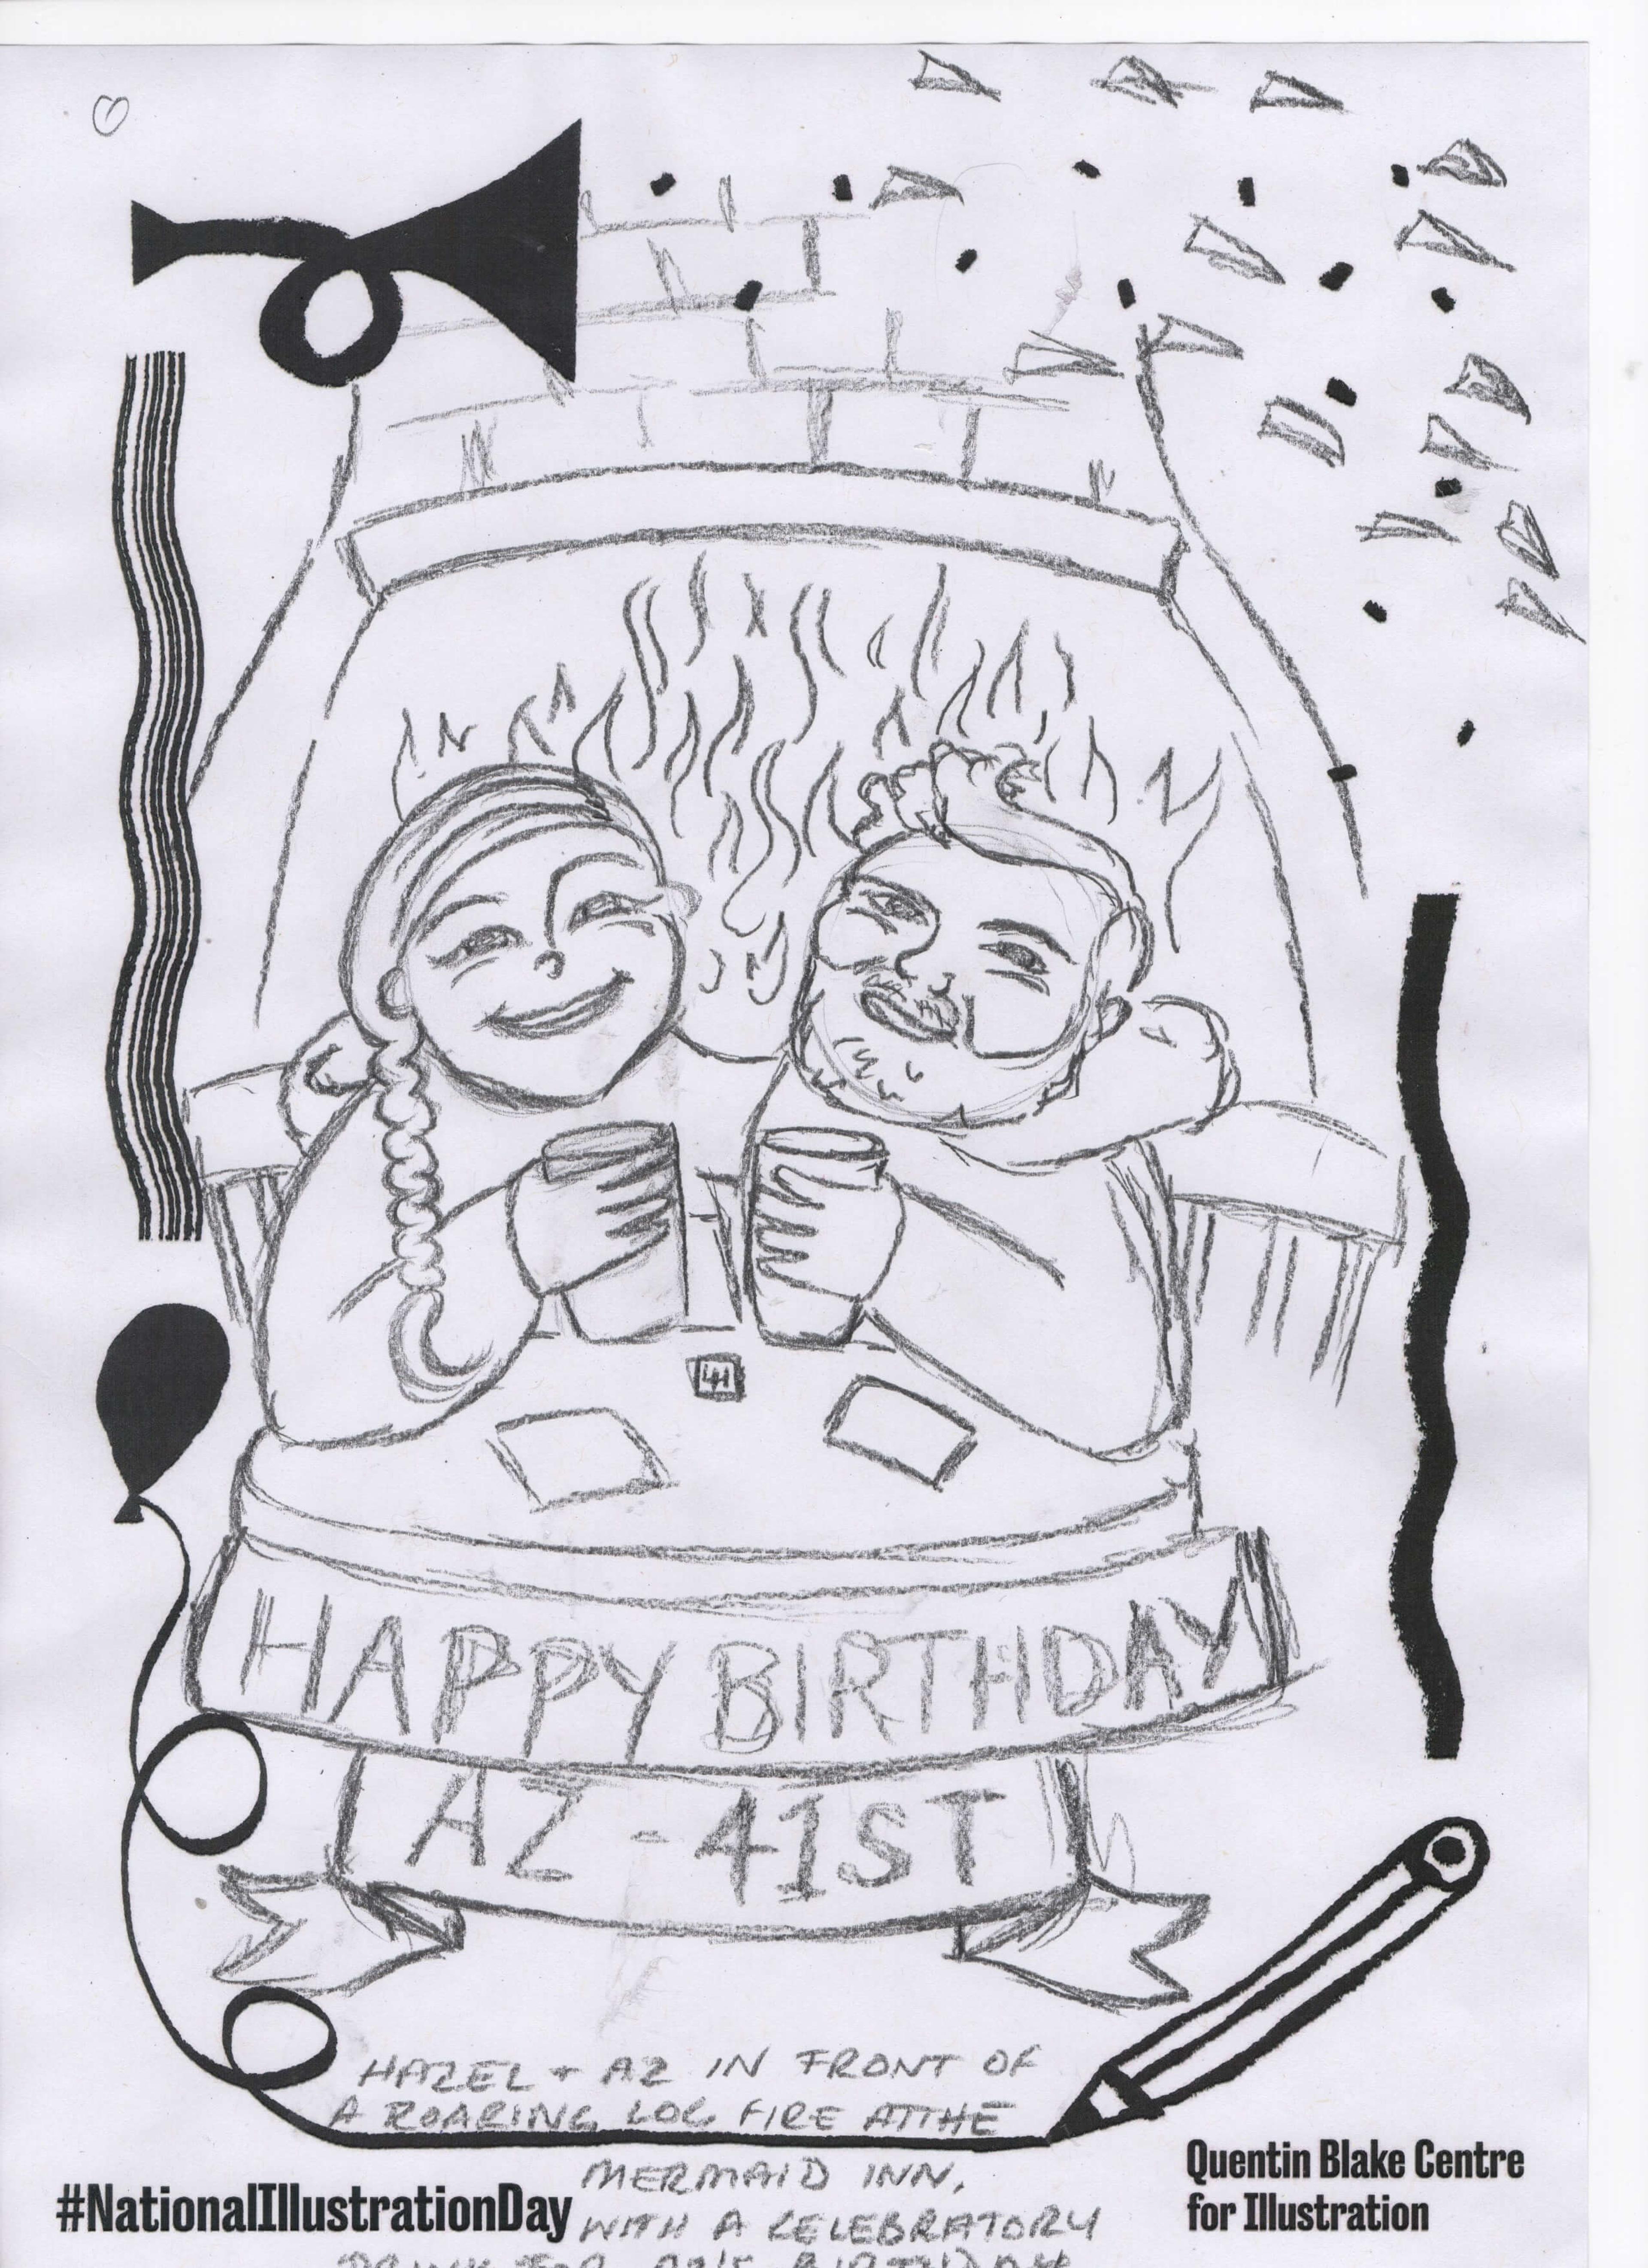 Illustration of two adults holding celebratory mugs as a fire roars in the background. The picture includes the words "Happy Birthday Az - 41st" and a description of what the picture depicts.